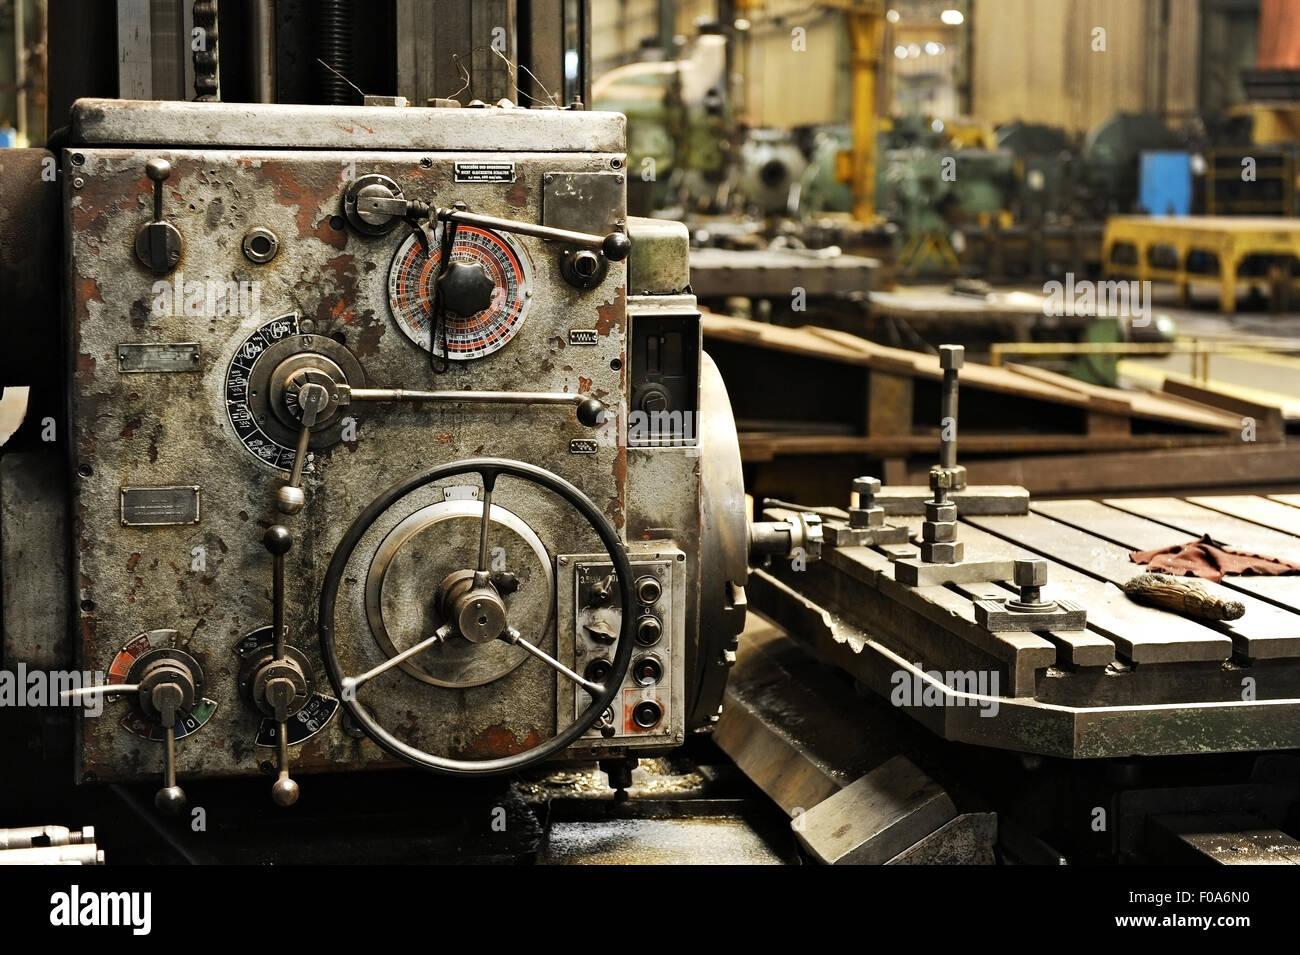 Detail shot with an industrial machinery inside a factory Stock Photo